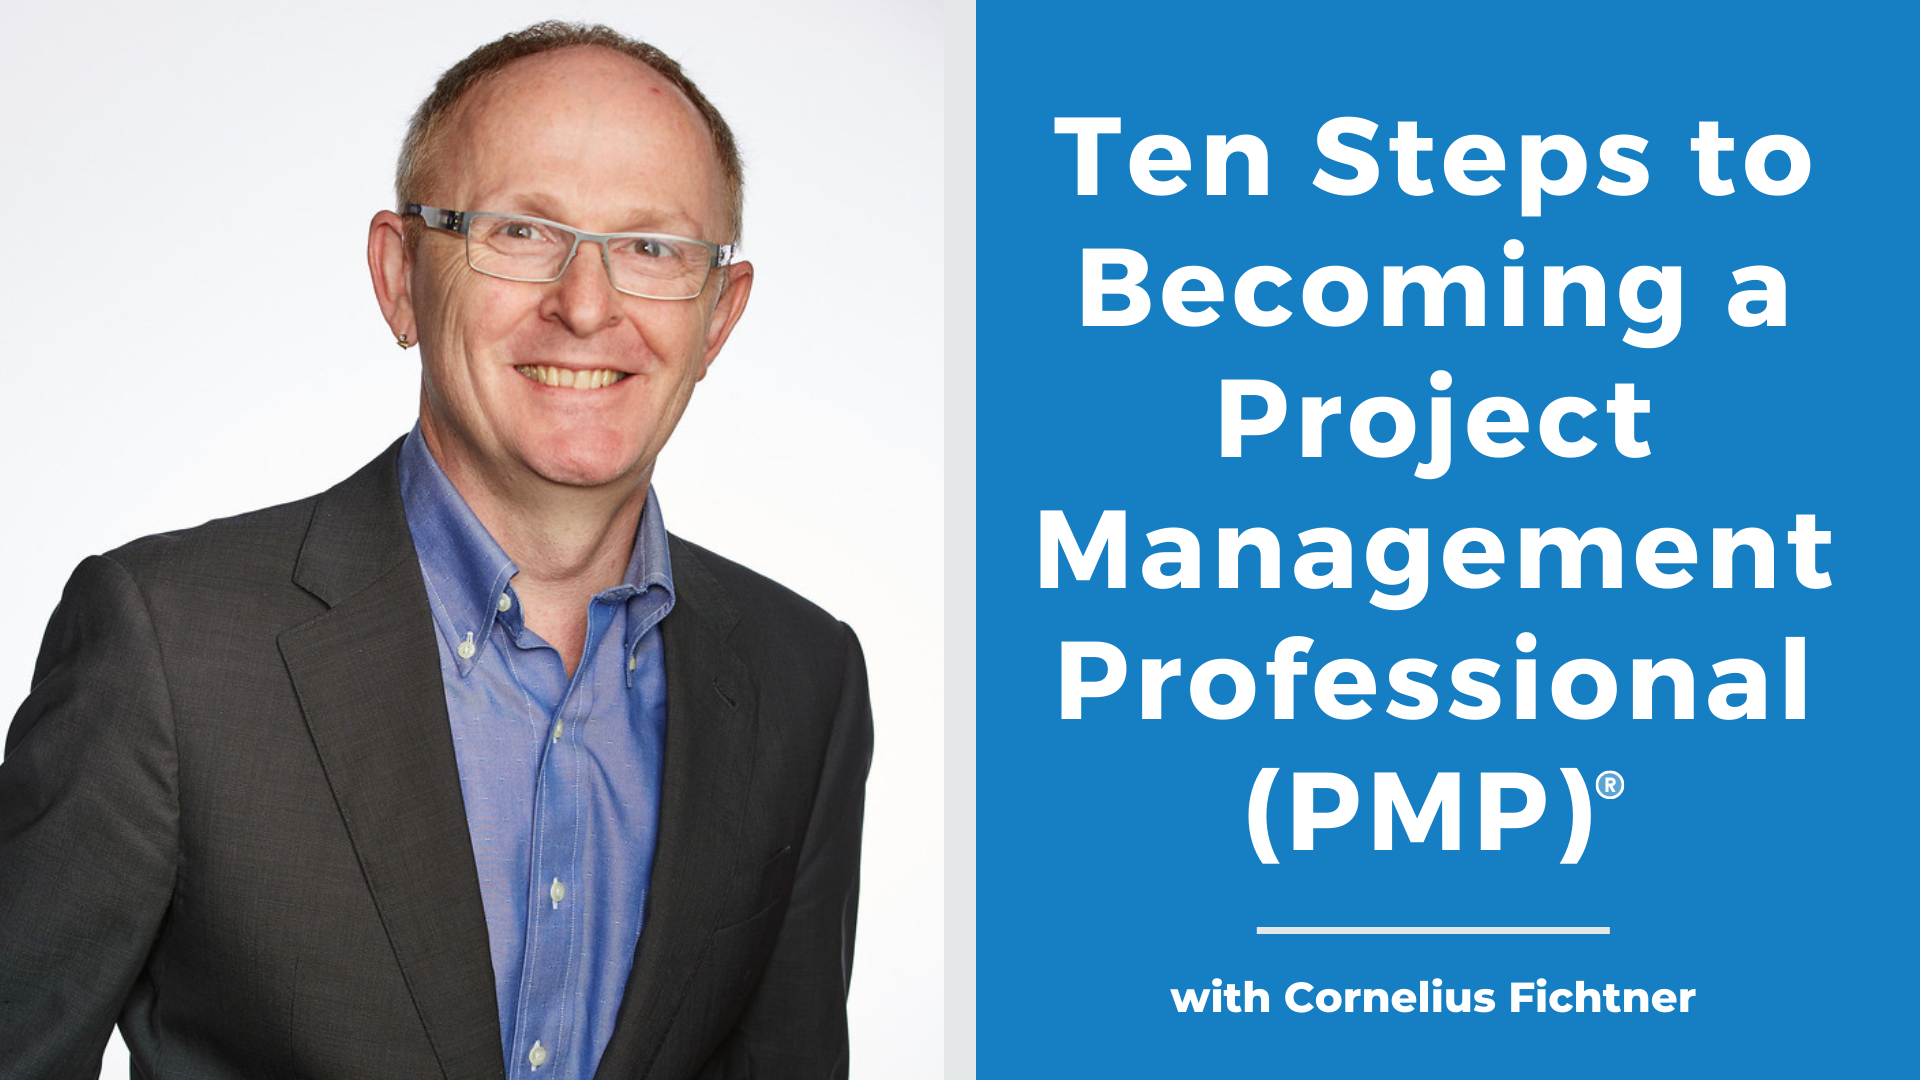 Ten Easy Steps to Becoming a PMP